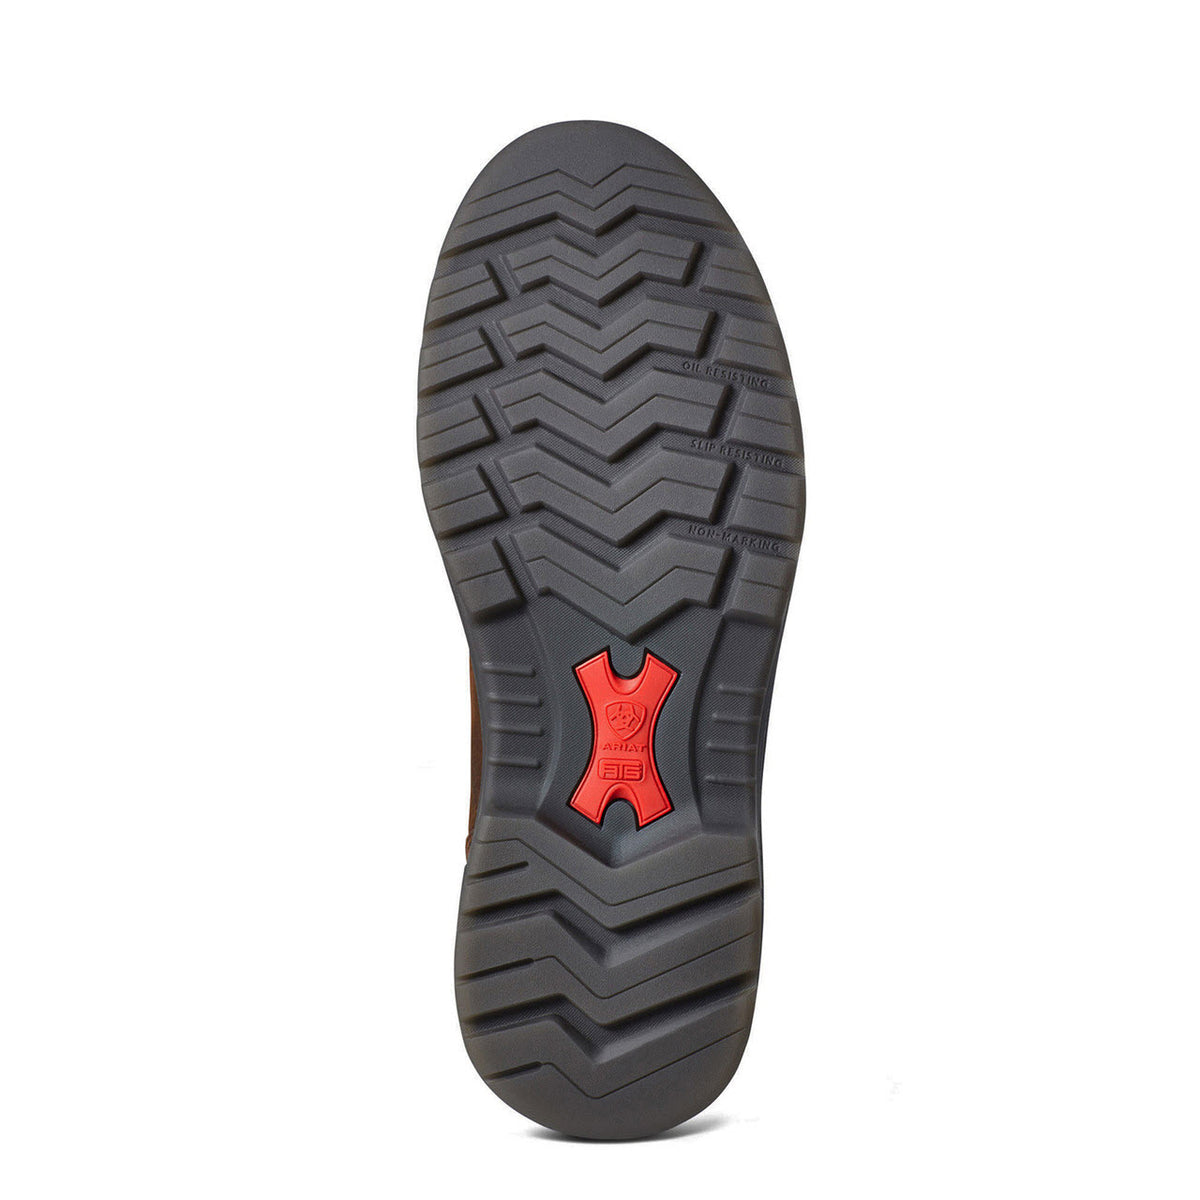 A black rubber shoe sole with a complex tread pattern and a red logo in the center featuring DRYShield waterproof-breathable technology on the Ariat Turbo USA Carbon Toe Rich Brown - Men&#39;s.